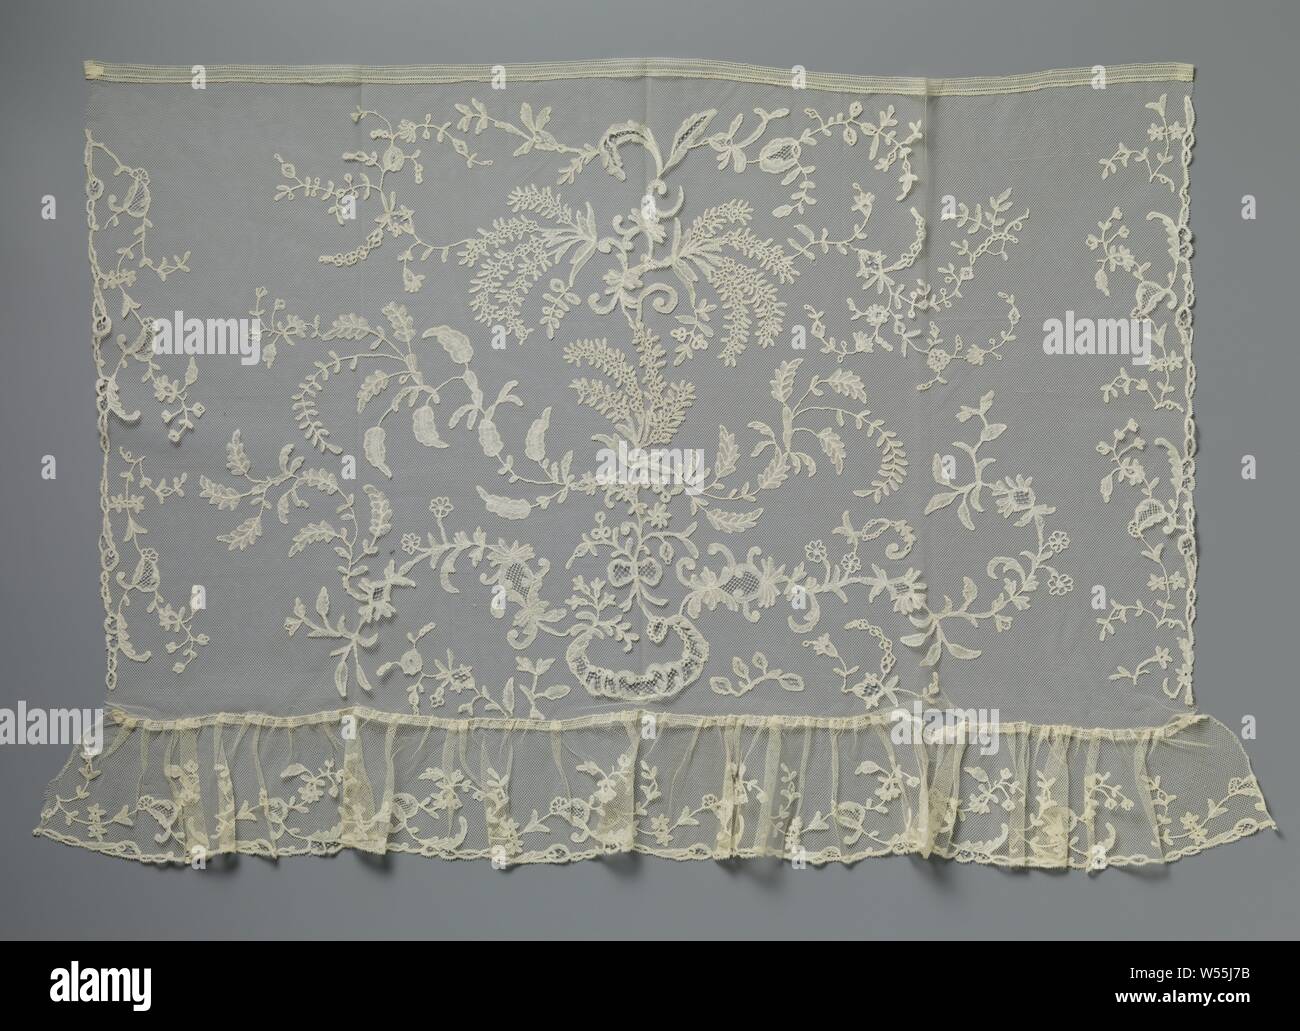 Strip application side with mimosa branches, Strip natural color application side, bobbin lace appliqued on machine tulle. The pattern shows a row of mimosa branches waving to the right., anonymous, Belgium (possibly), c. 1890 - c. 1909, linen (material), h 10 cm × w 149 cm ×, 18.5 cm Stock Photo